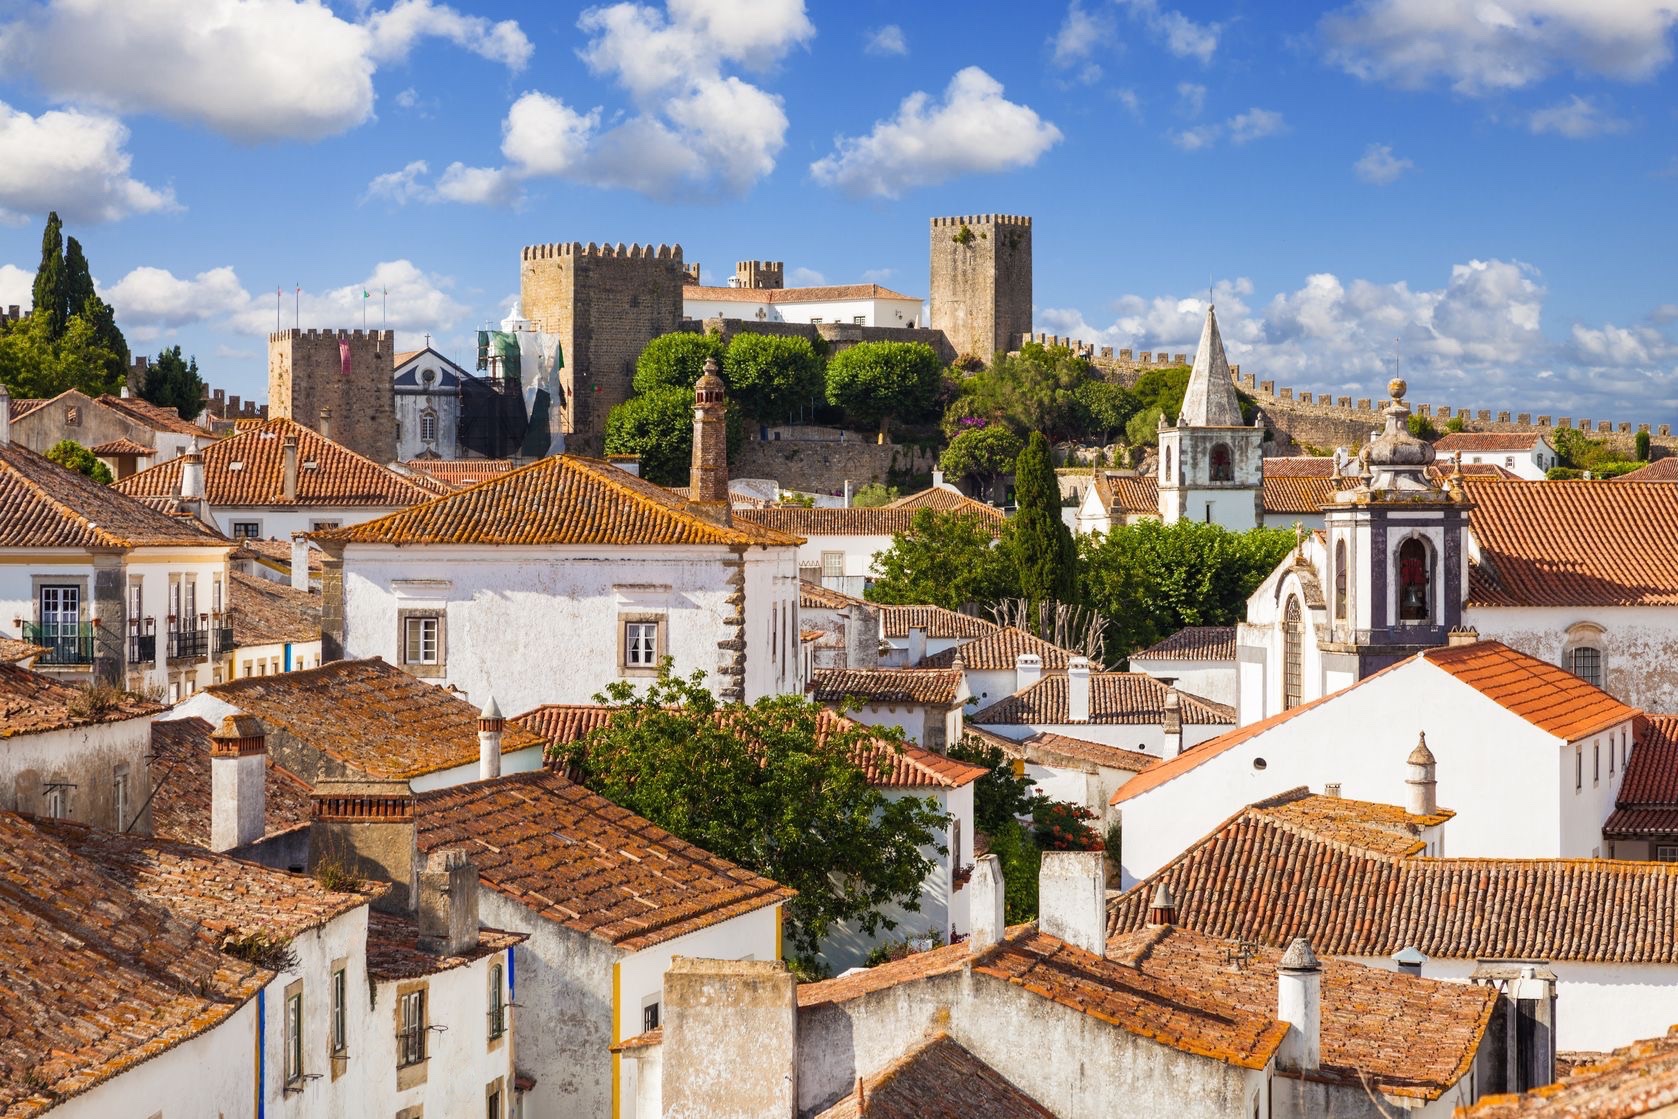 Obidos, one of the most romantic Portuguese towns 